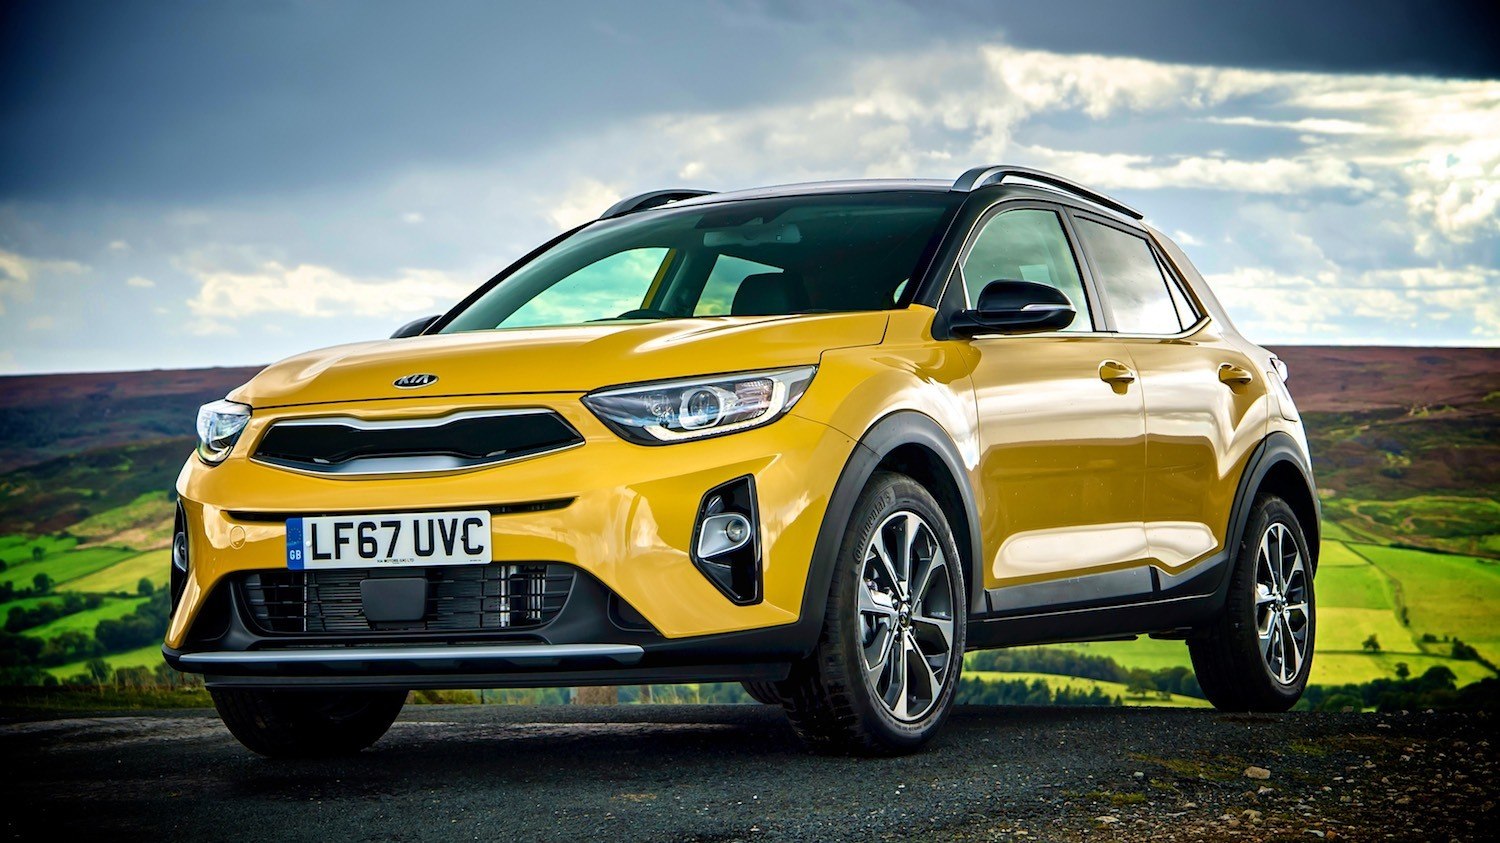 Kia Stonic is ready to battle subcompact crossovers, but is it